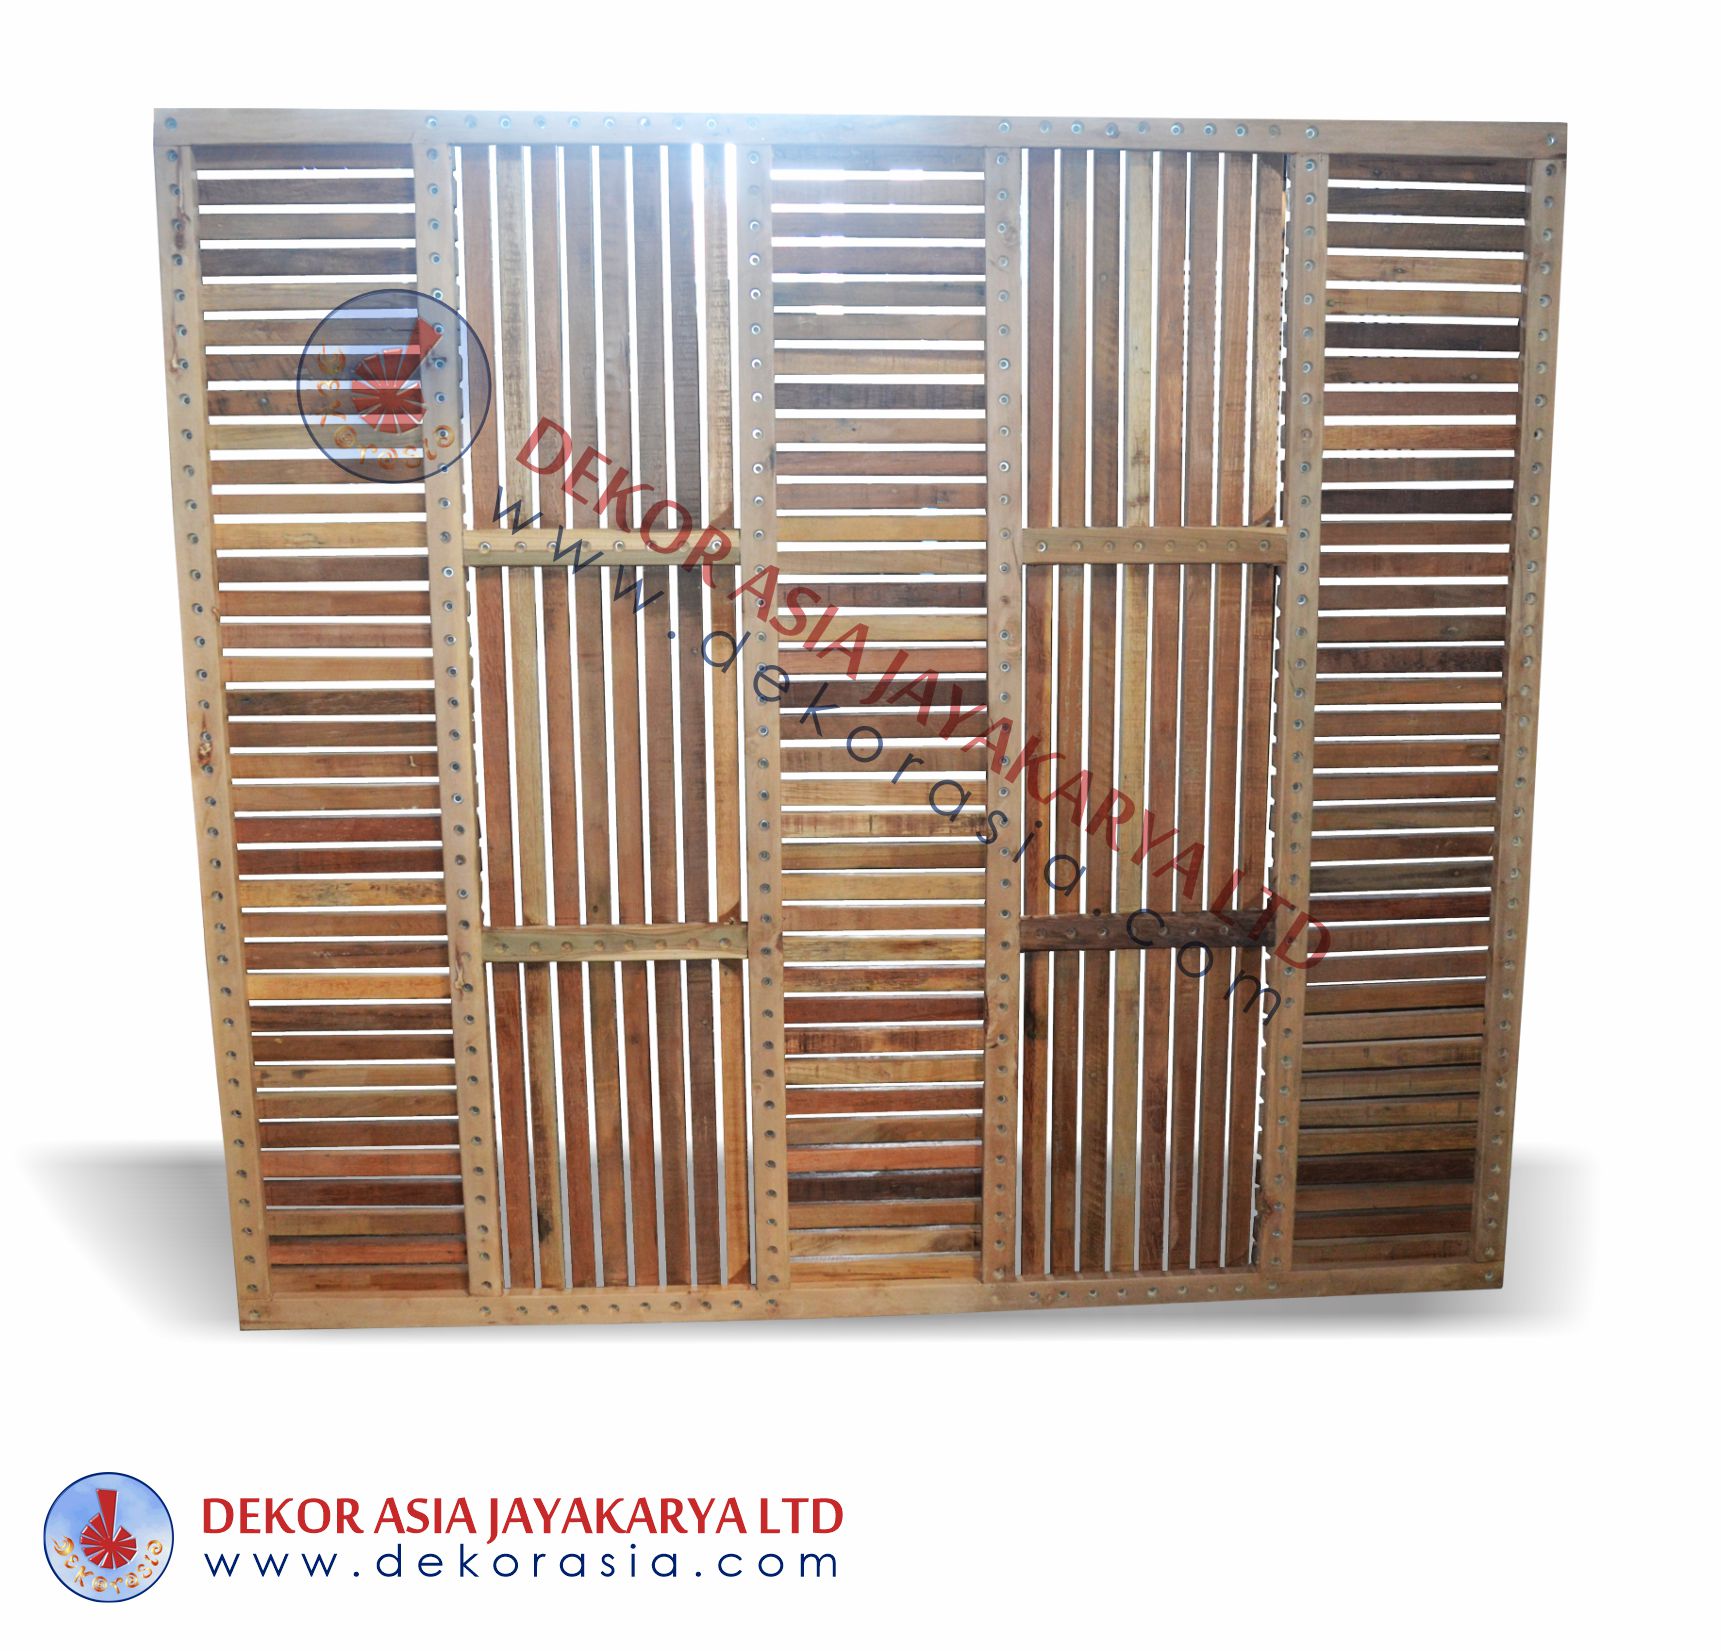 Teak Timber Screen / Wooden Screen Recycled teak timber screen for indoor and outdoor